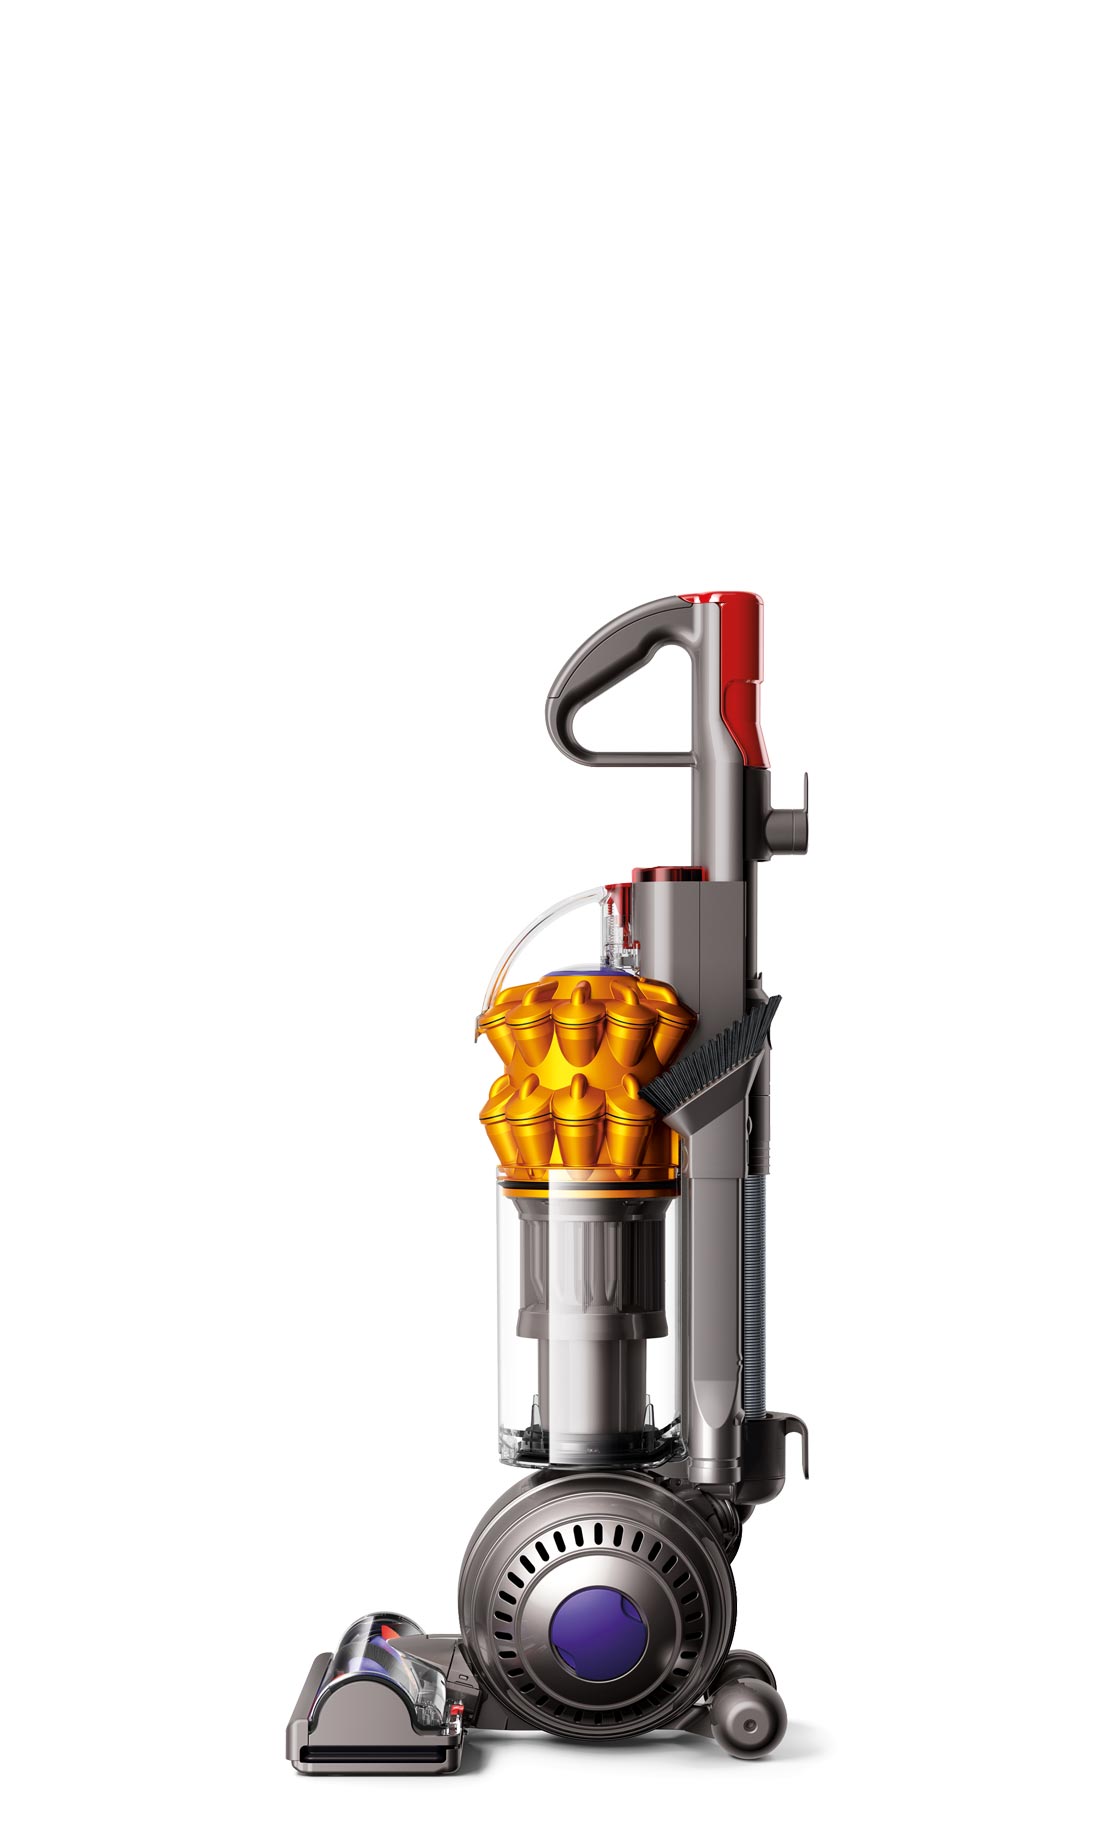 What are the Dyson repair locations in Chicago, IL?